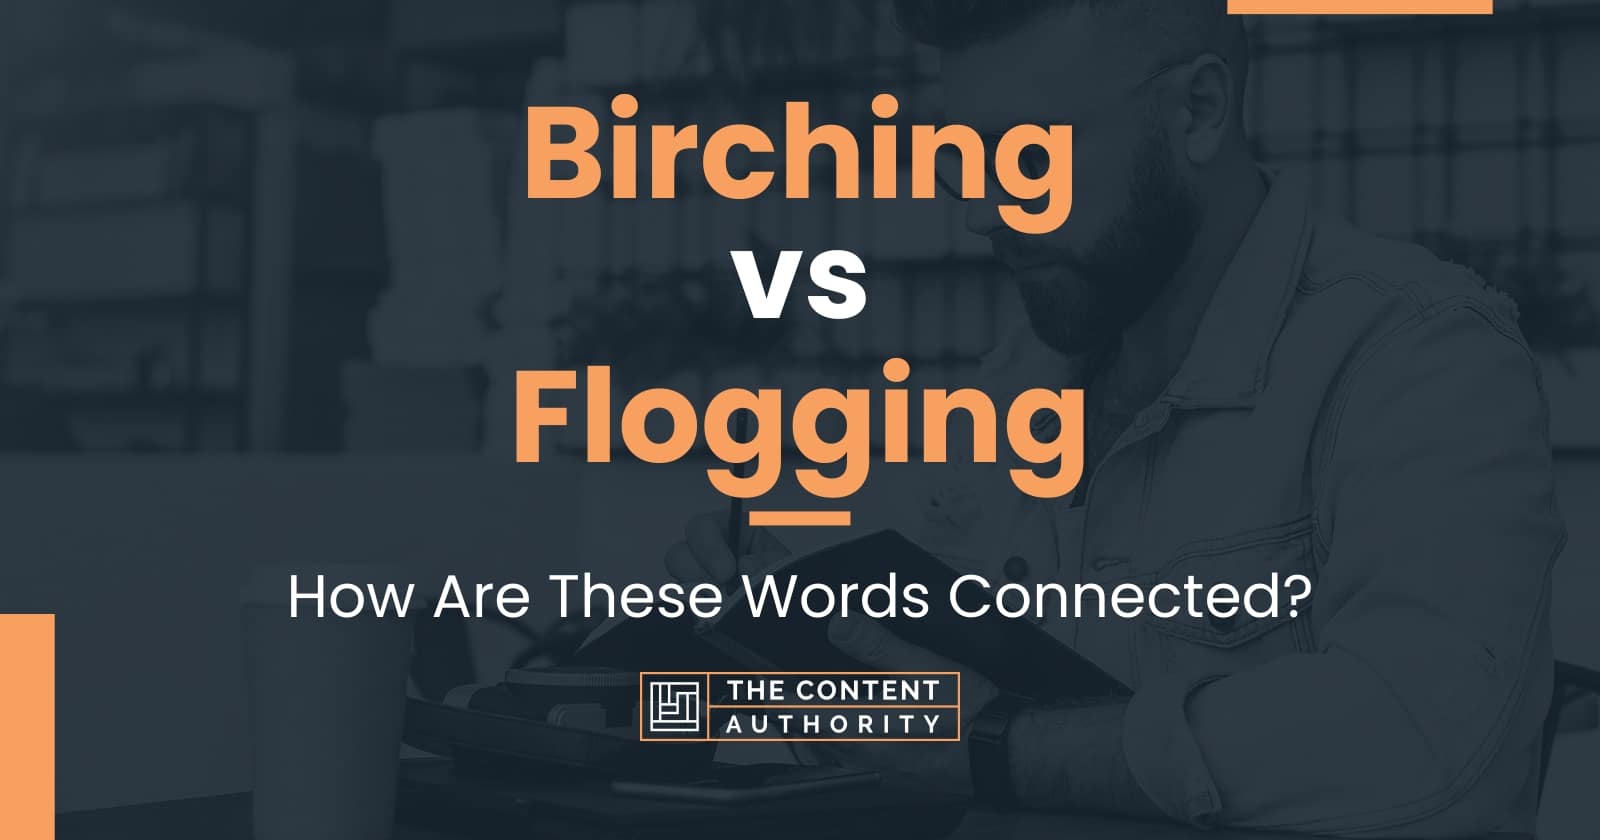 Birching vs Flogging: How Are These Words Connected?